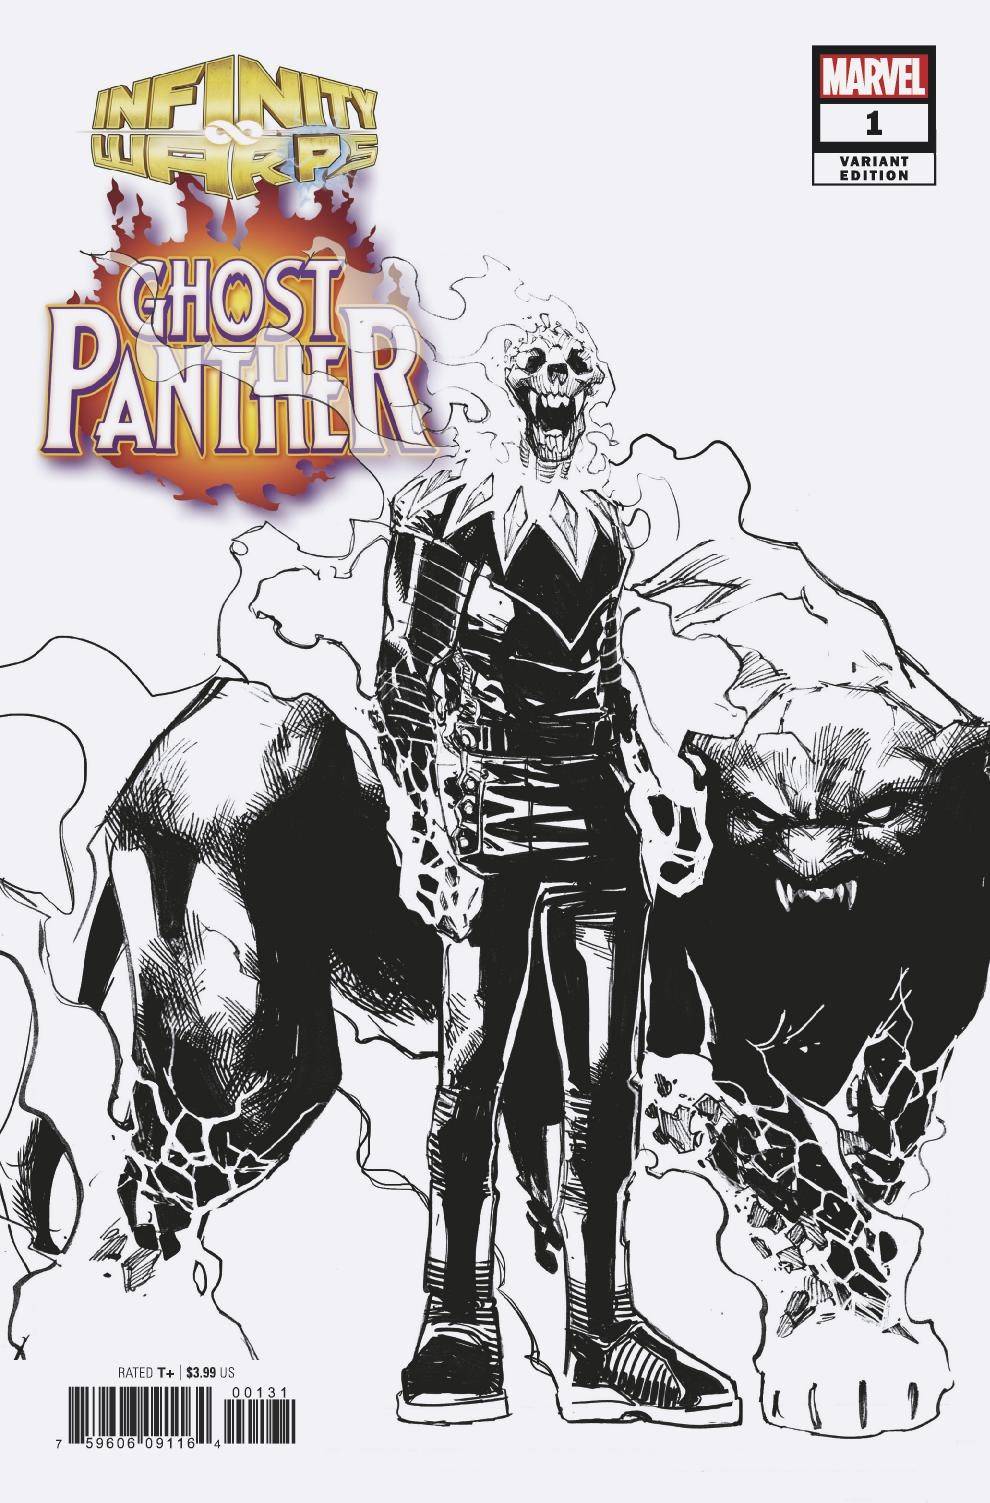 Infinity Wars: Ghost Panther #1 (of 2) Humberto Ramos Design Variant